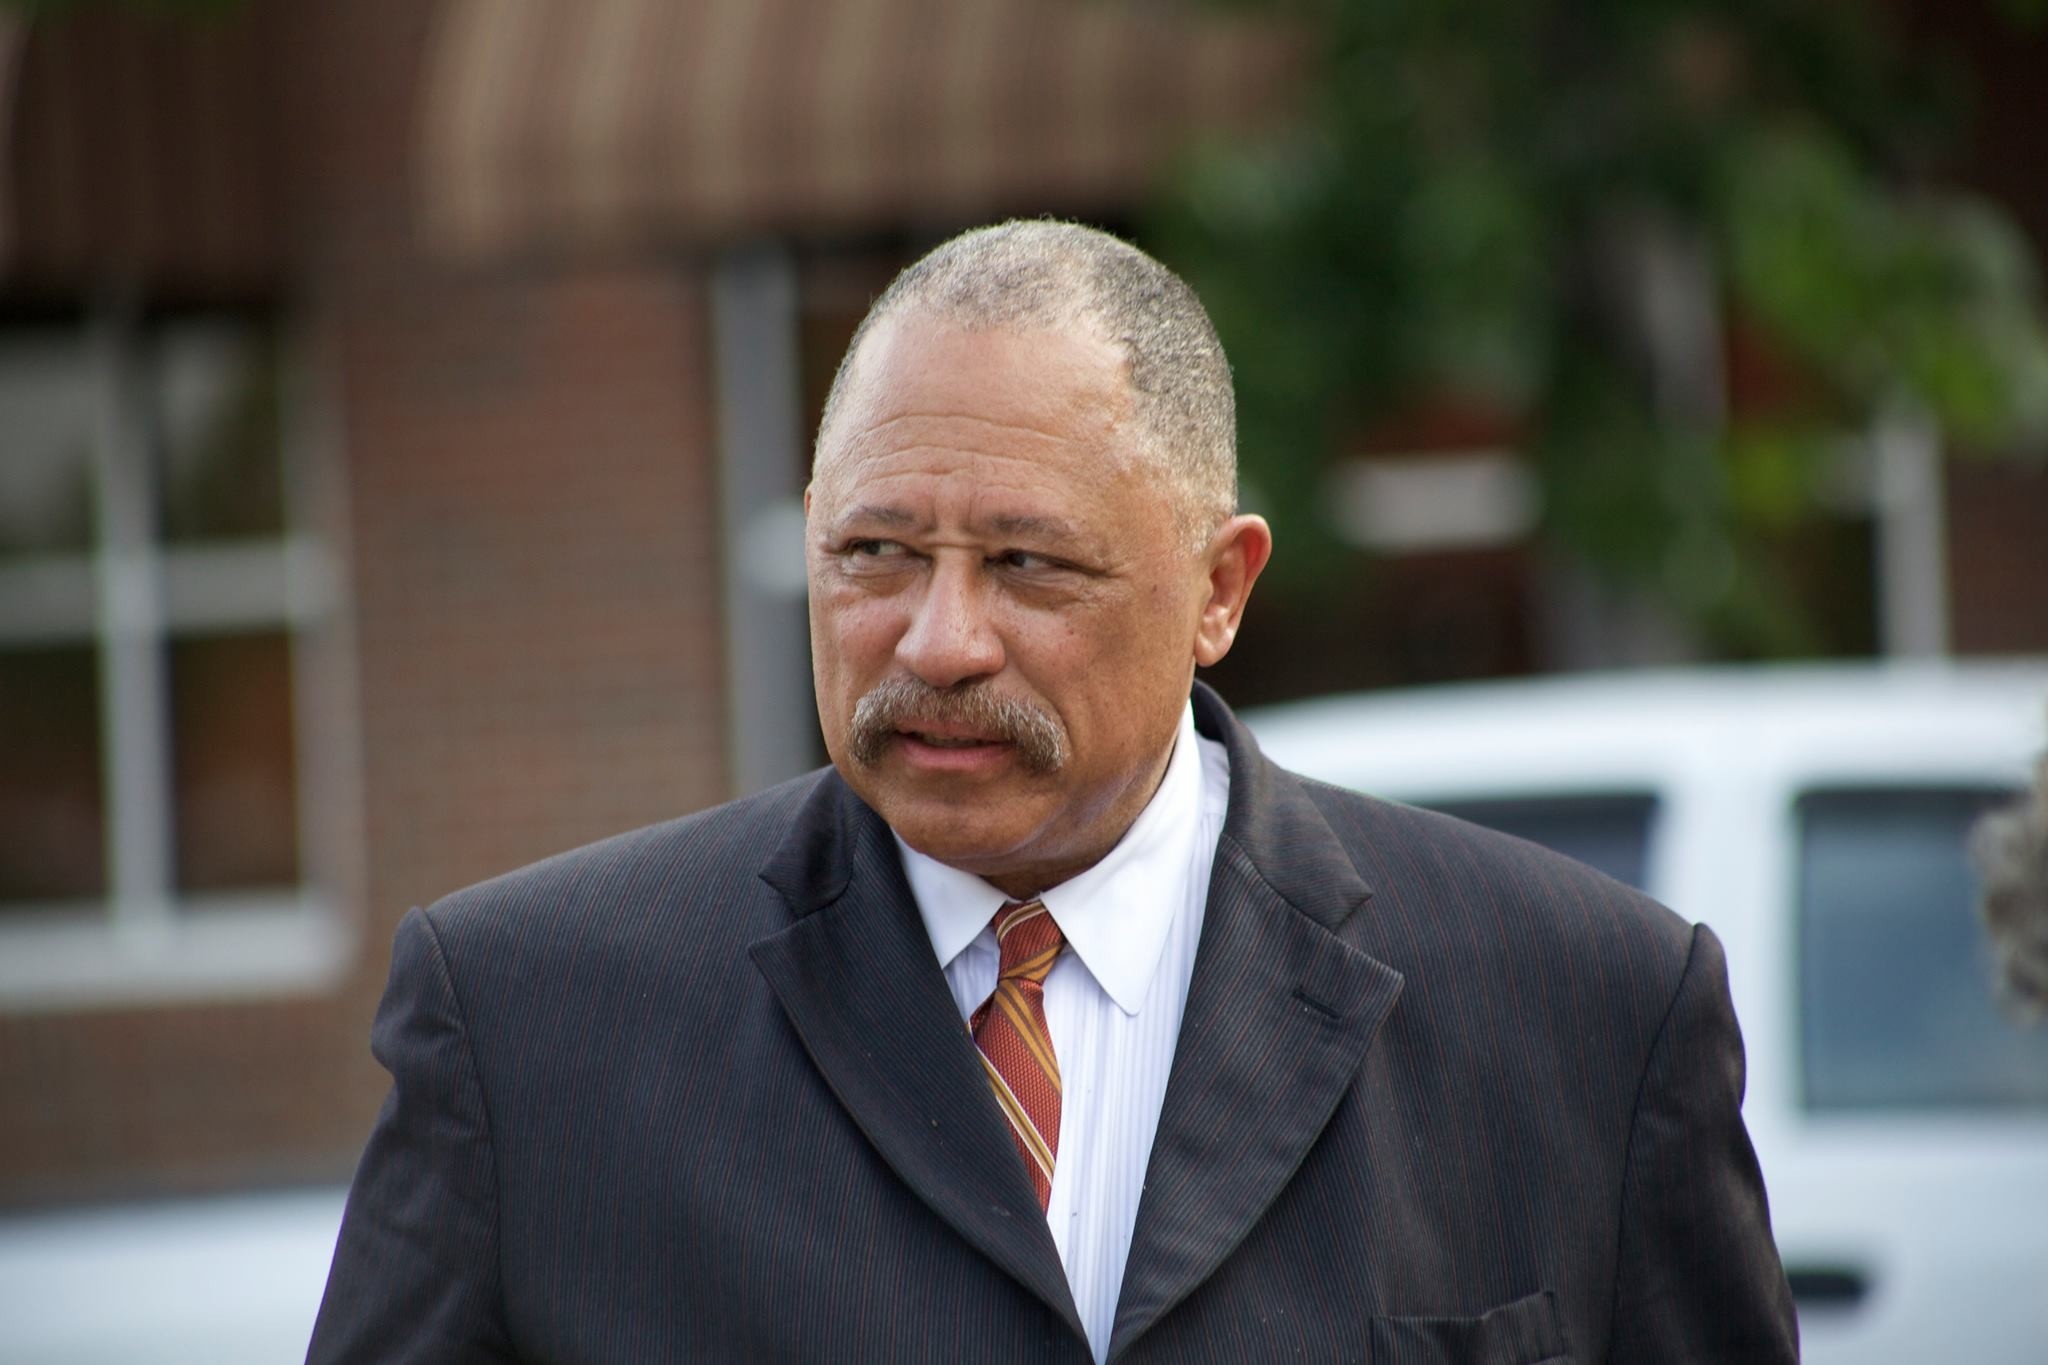 10-captivating-facts-about-judge-joe-brown